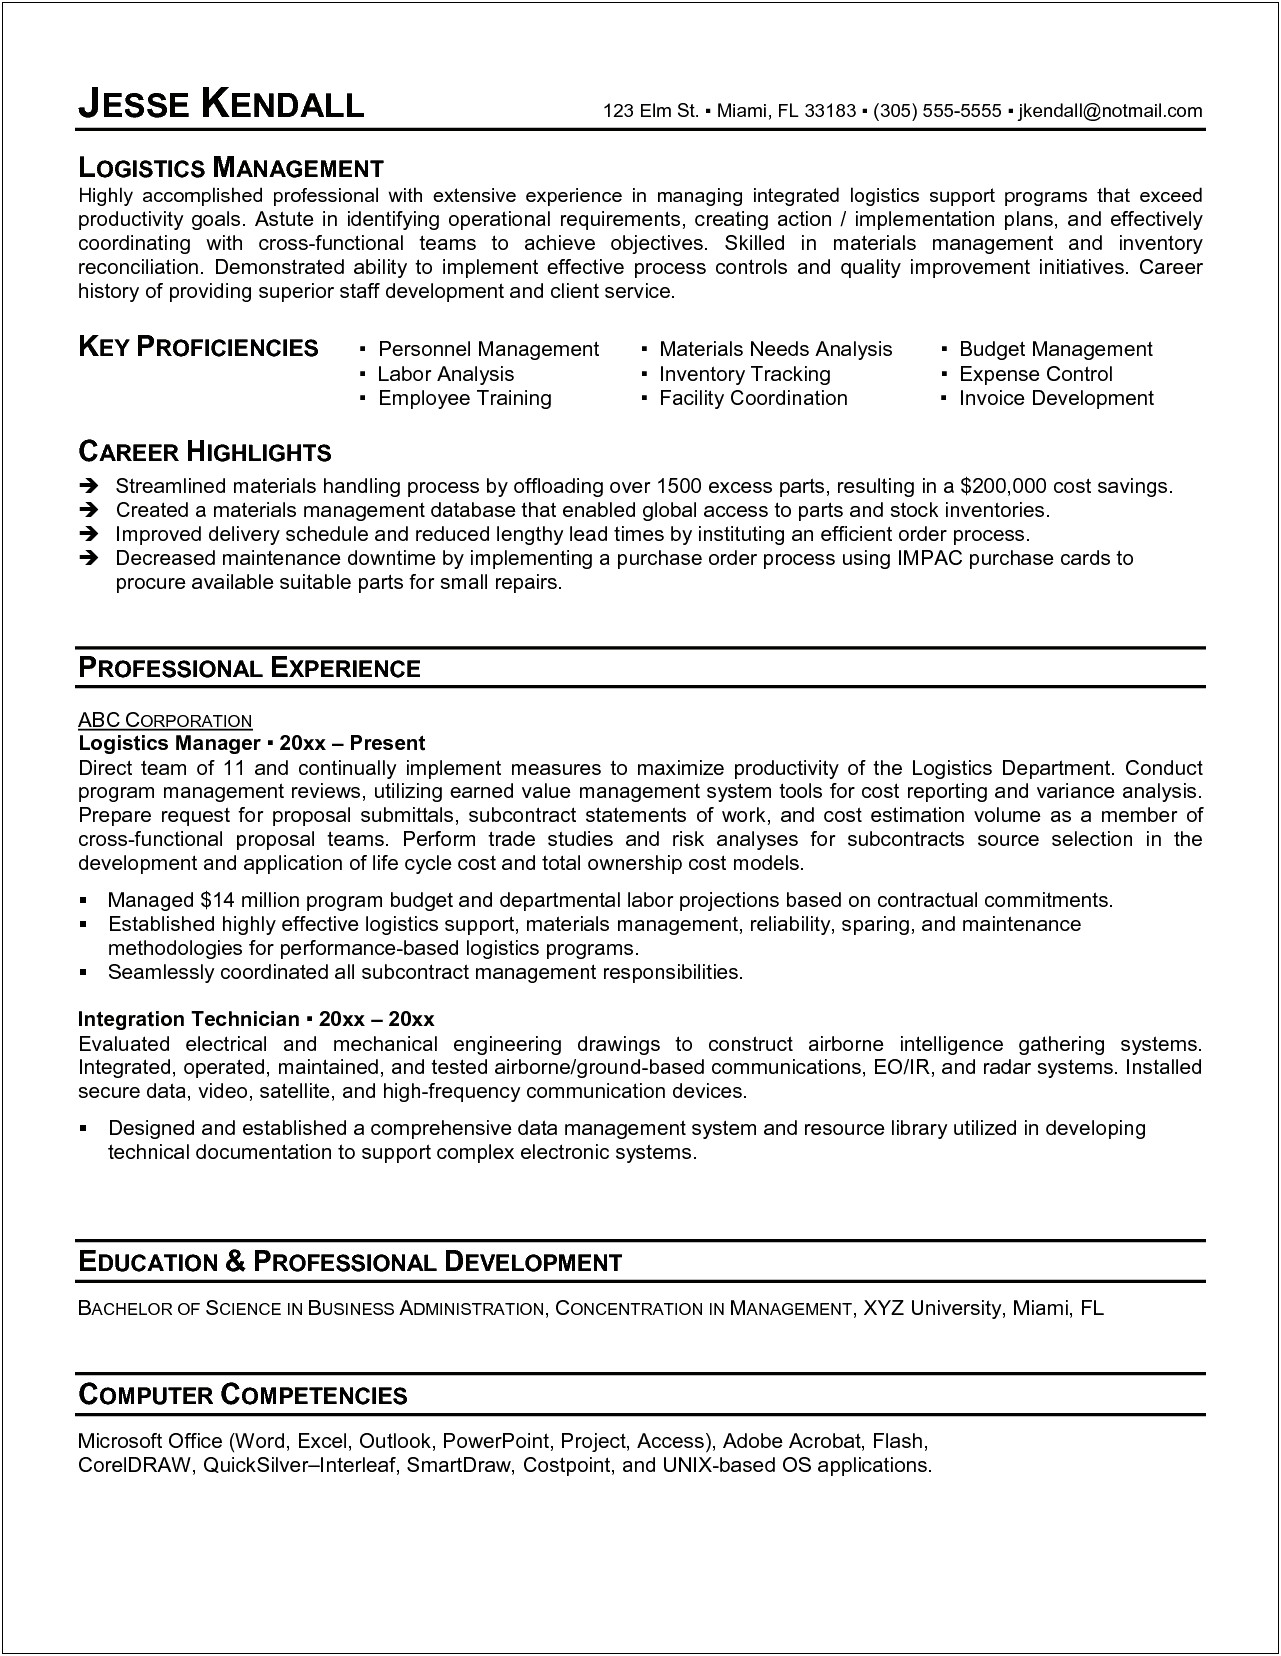 Career Highlights Qualifications For Resume Examples